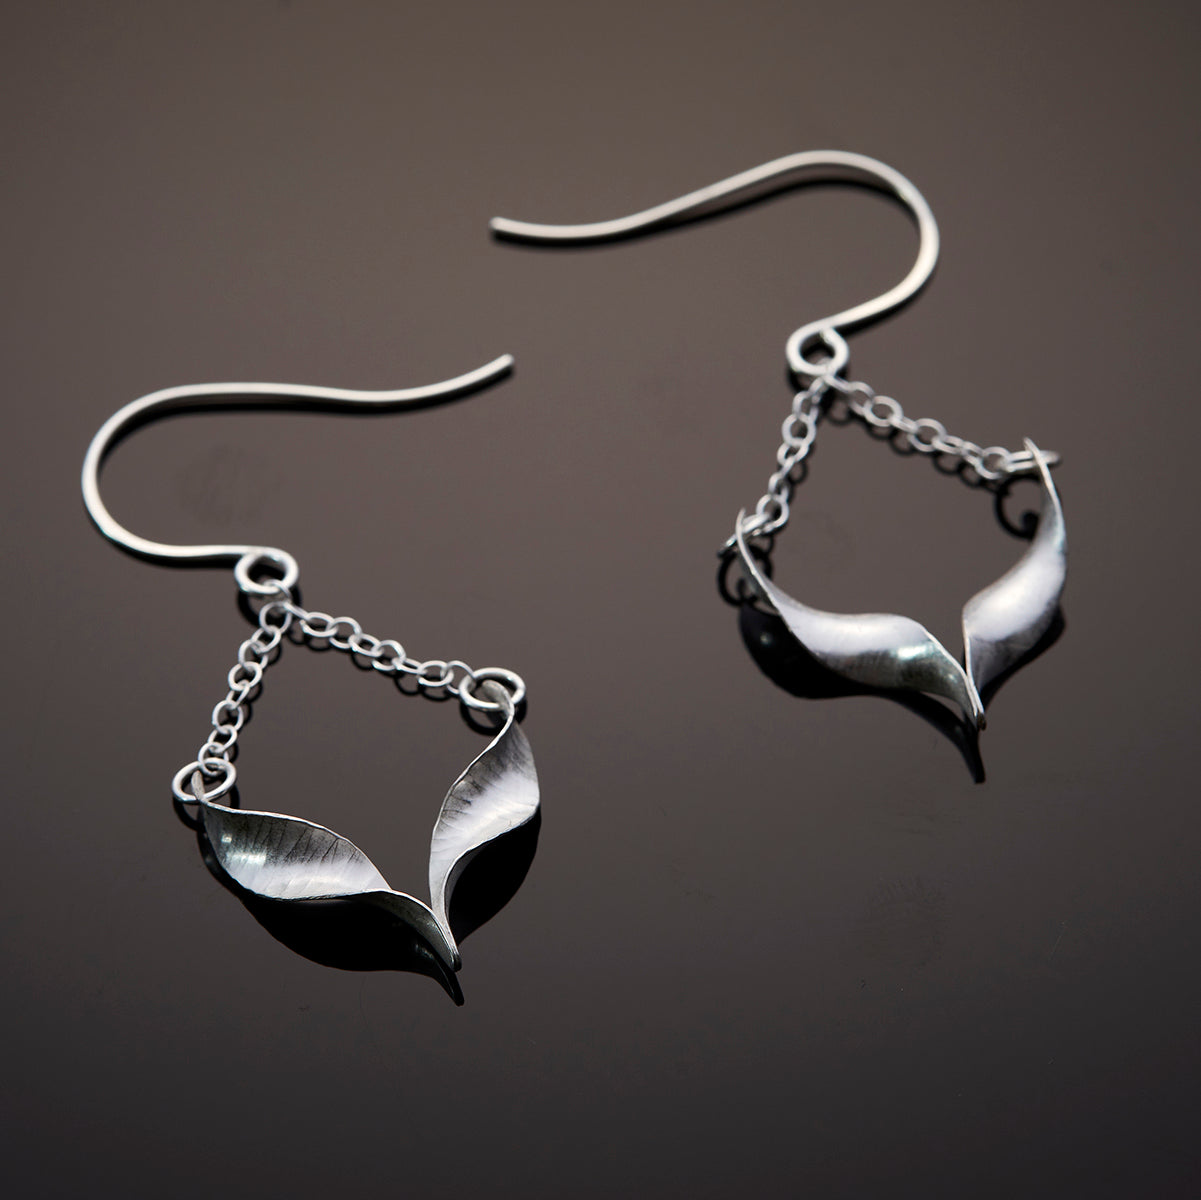 A pair of sculptural silver bird earrings. Each is composed of two twists of hammered silver joined at the central point and hanging from a handmade hook by means of delicate trace chain. They have a hammered texture, non-reflective finish and burnished edges. The front of one is shown with its hammered texture; the smooth back of the other is on display.